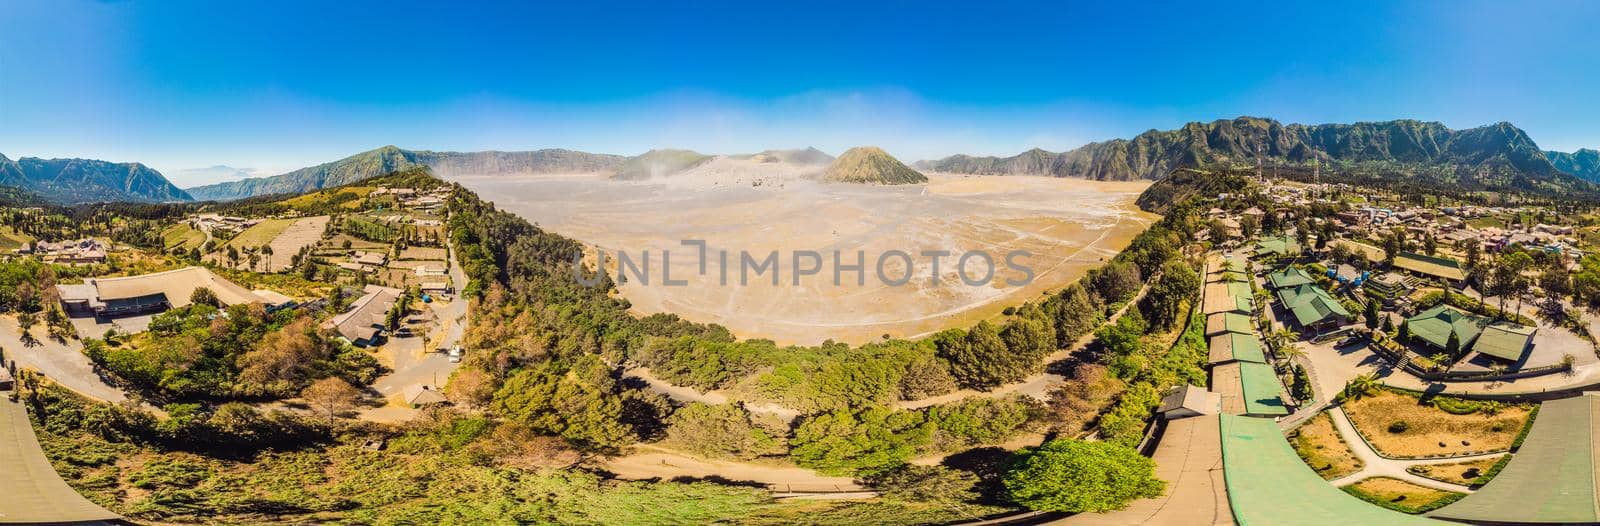 Panoramic Aerial shot of the Bromo volcano and Batok volcano at the Bromo Tengger Semeru National Park on Java Island, Indonesia. One of the most famous volcanic objects in the world. Travel to Indonesia concept.